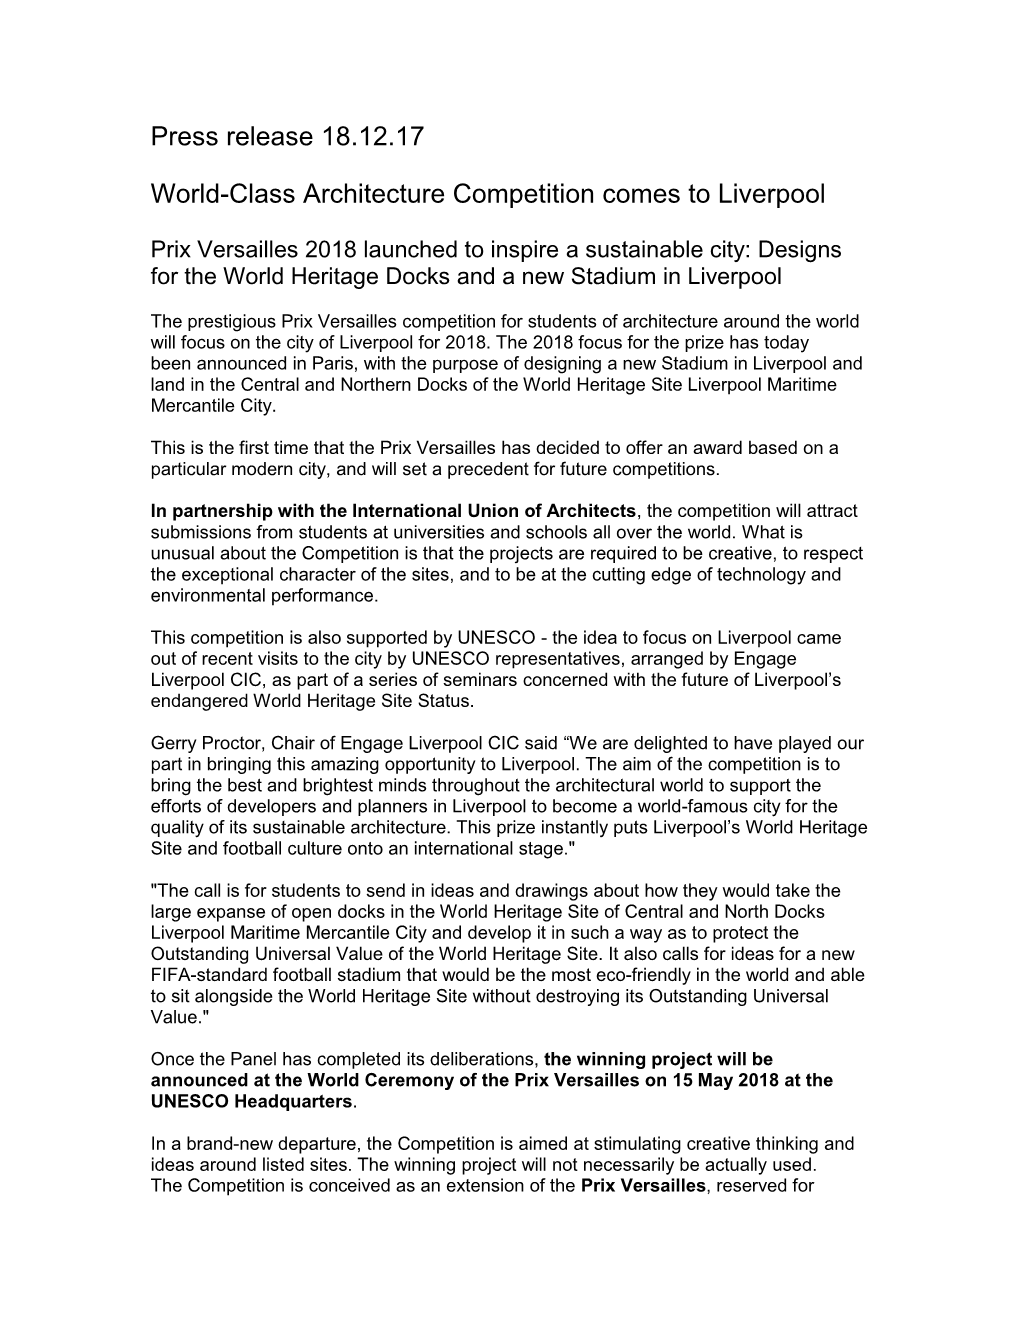 Press Release 18.12.17 World-Class Architecture Competition Comes To